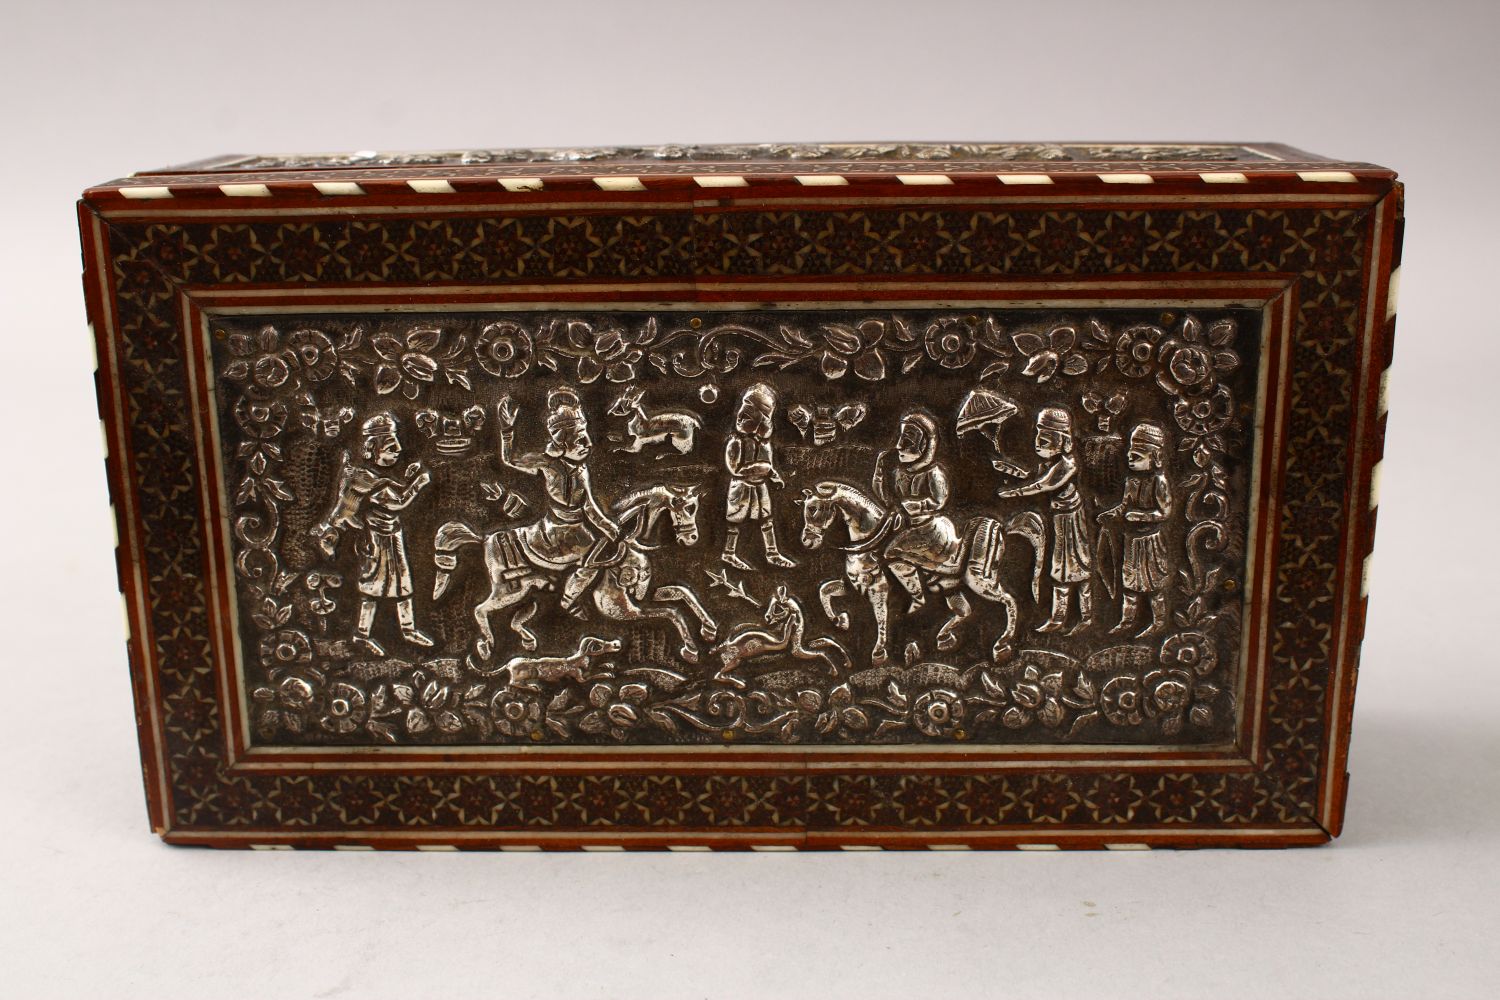 A GOOD IRANIAN SHIRAZ KHATEMI WOODEN & WHITE METAL BOX, the bod with inset white metal embossed - Image 3 of 10